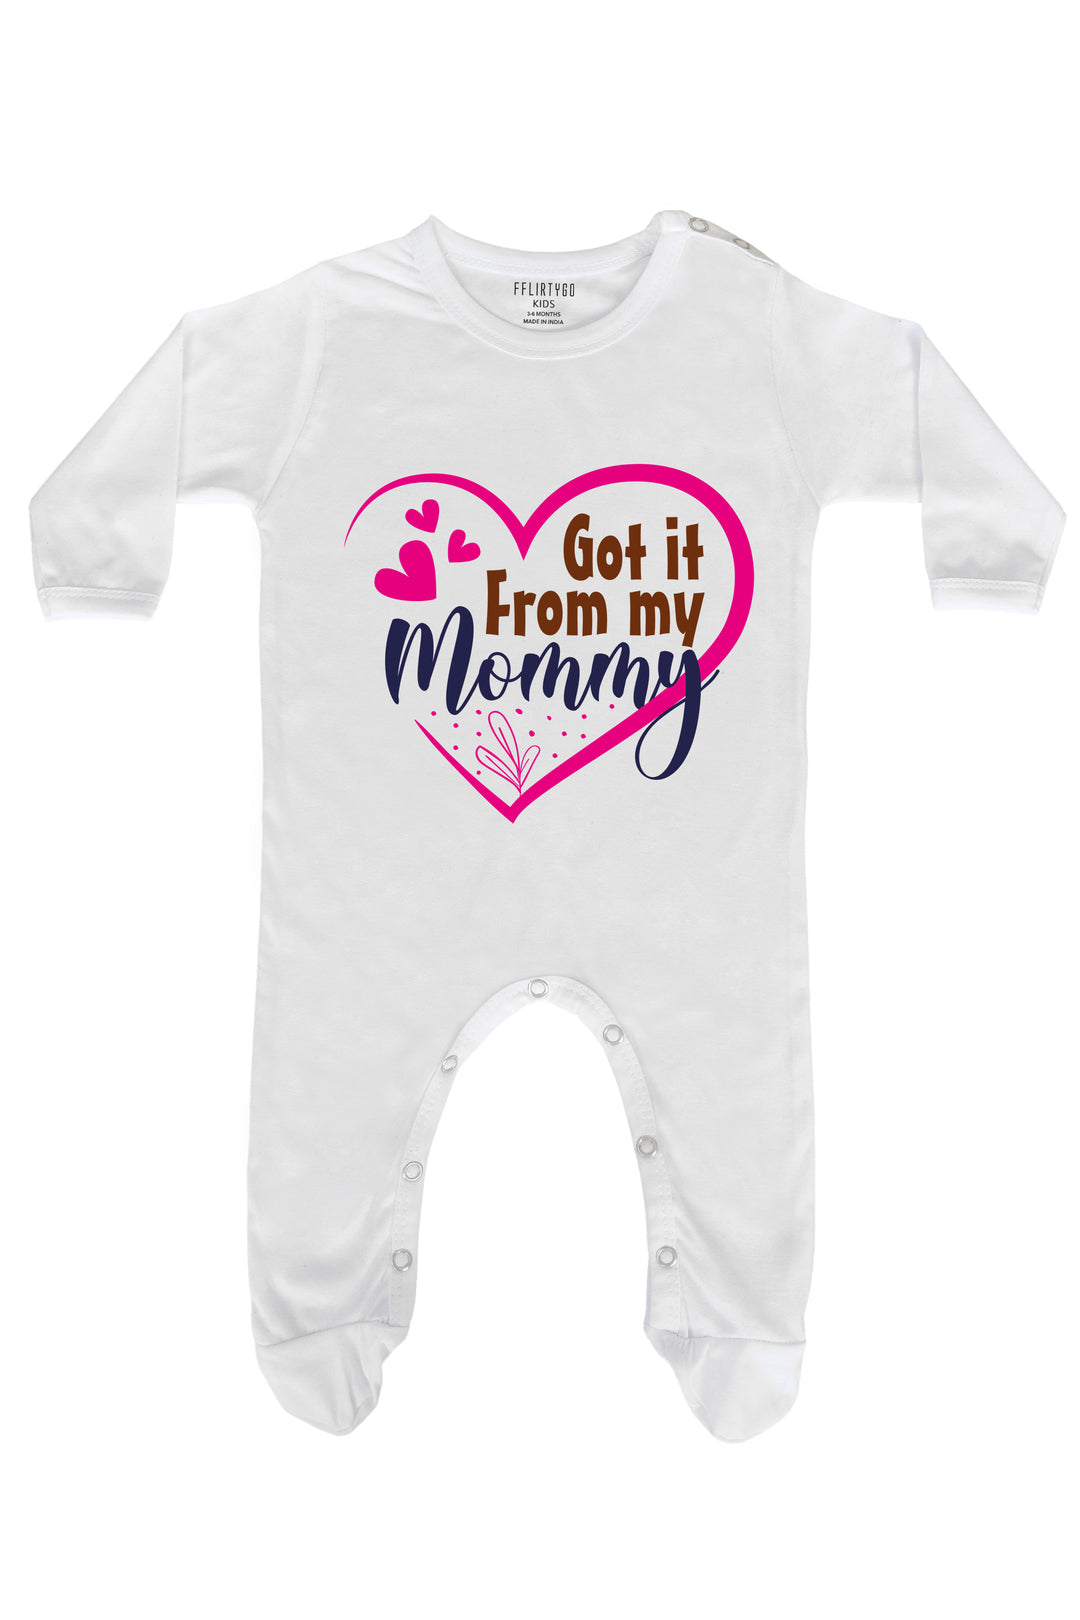 Got It From Mommy Baby Romper | Onesies